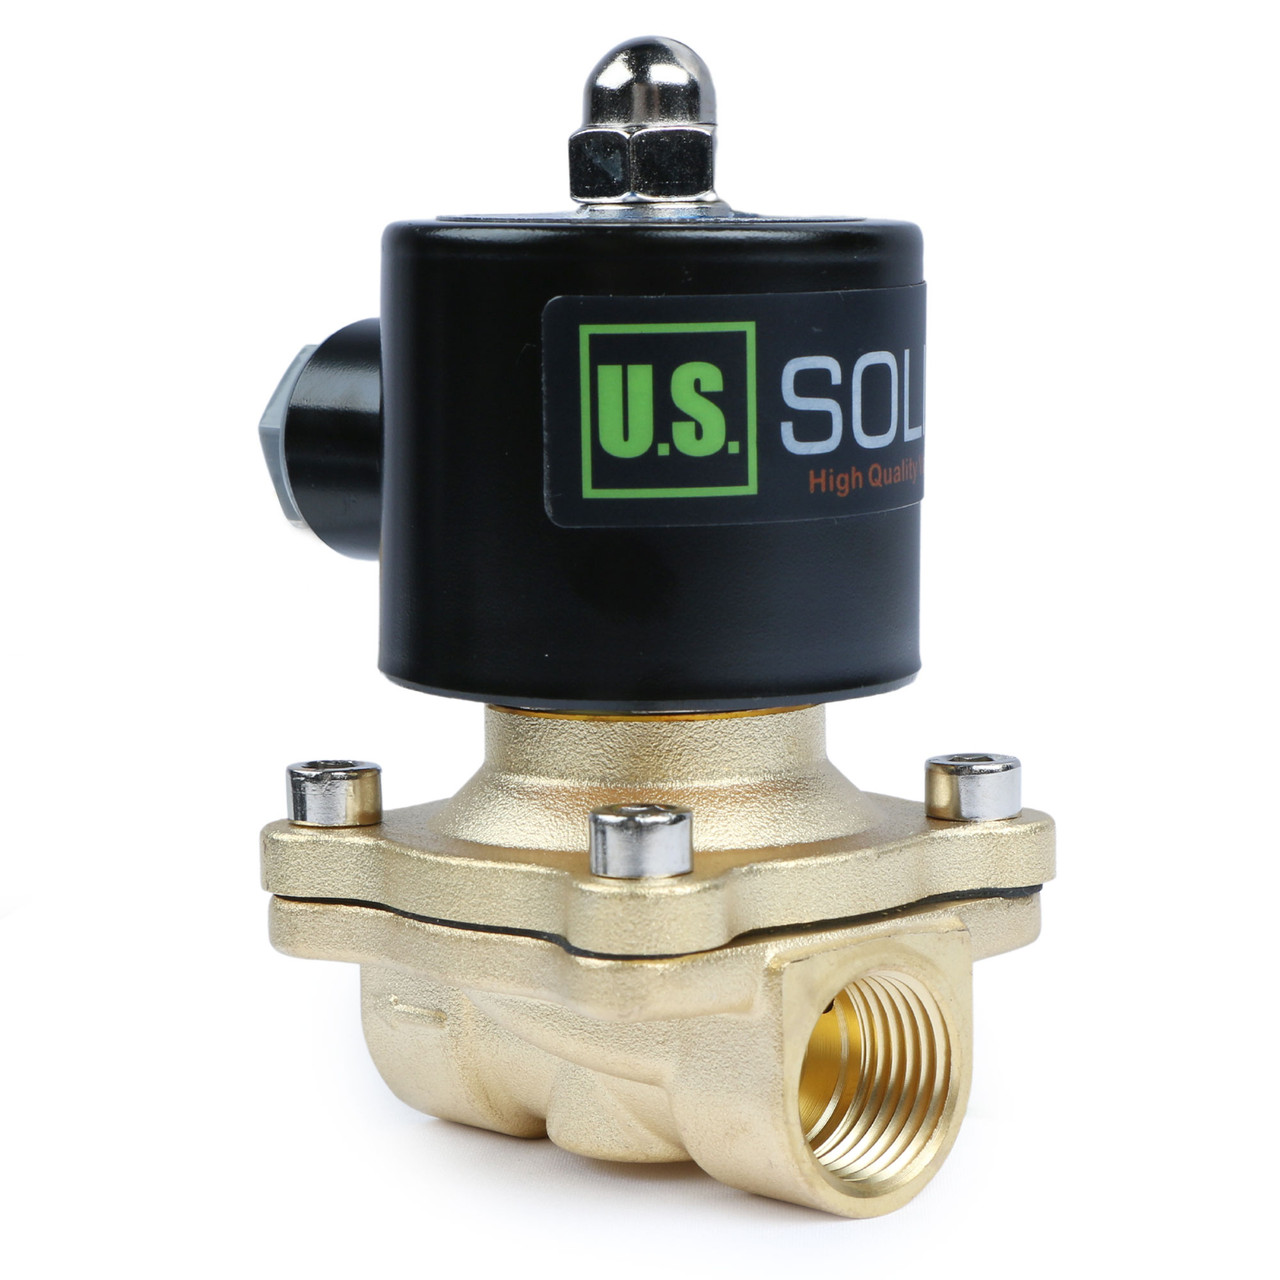 Solenoid valves for marine applications